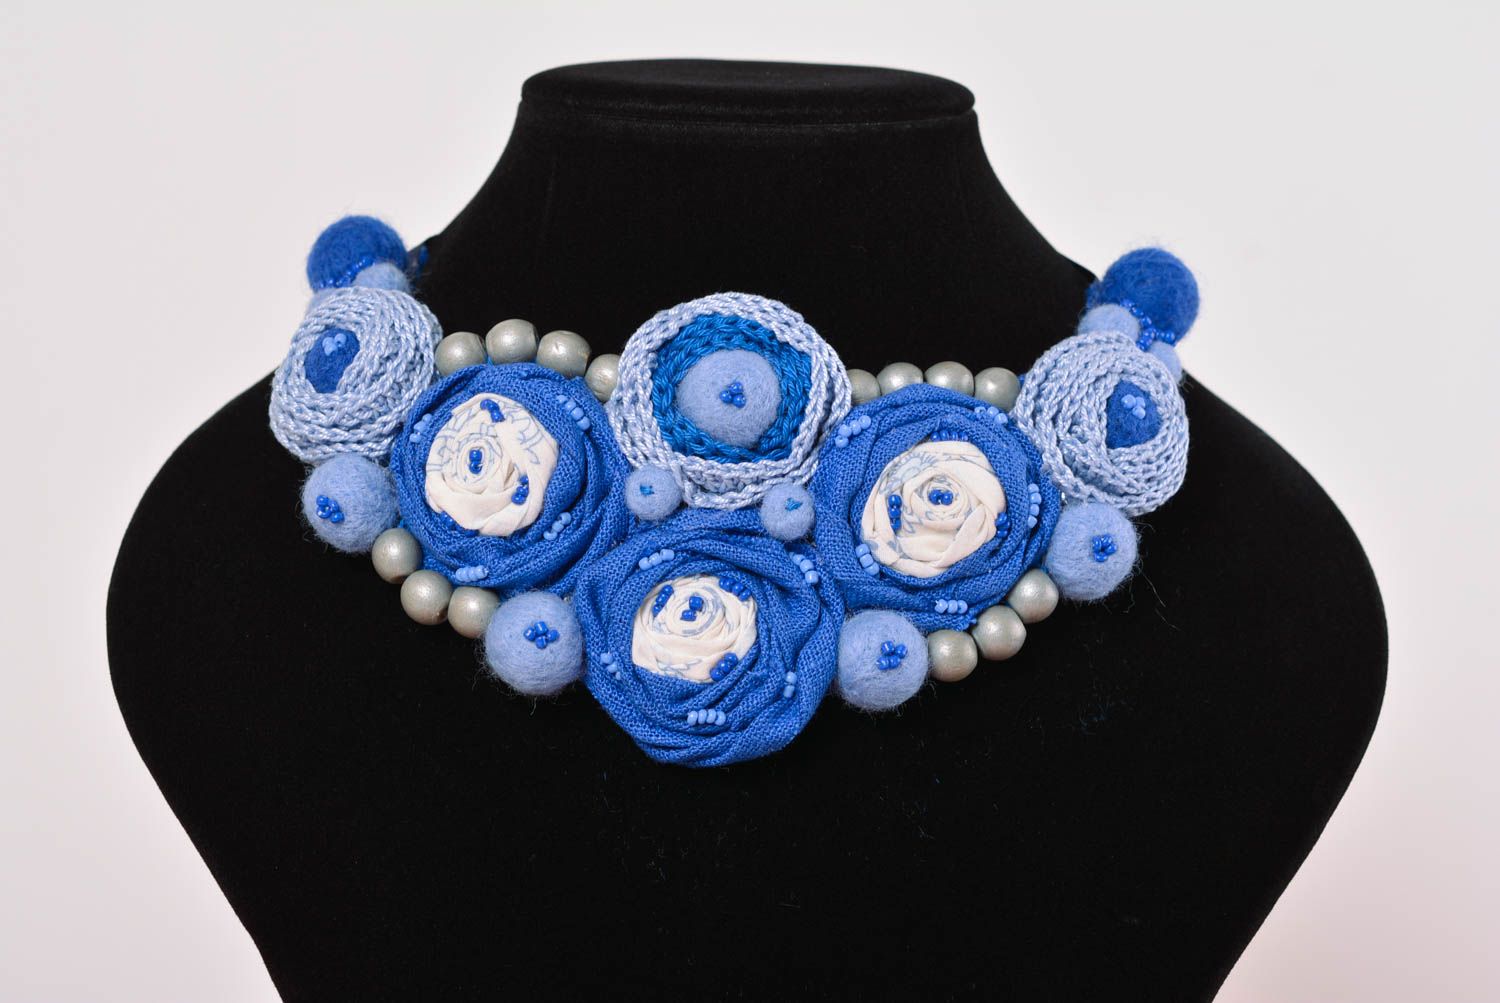 Designer necklace textile collar handmade neck accessory for women perfect gift photo 1